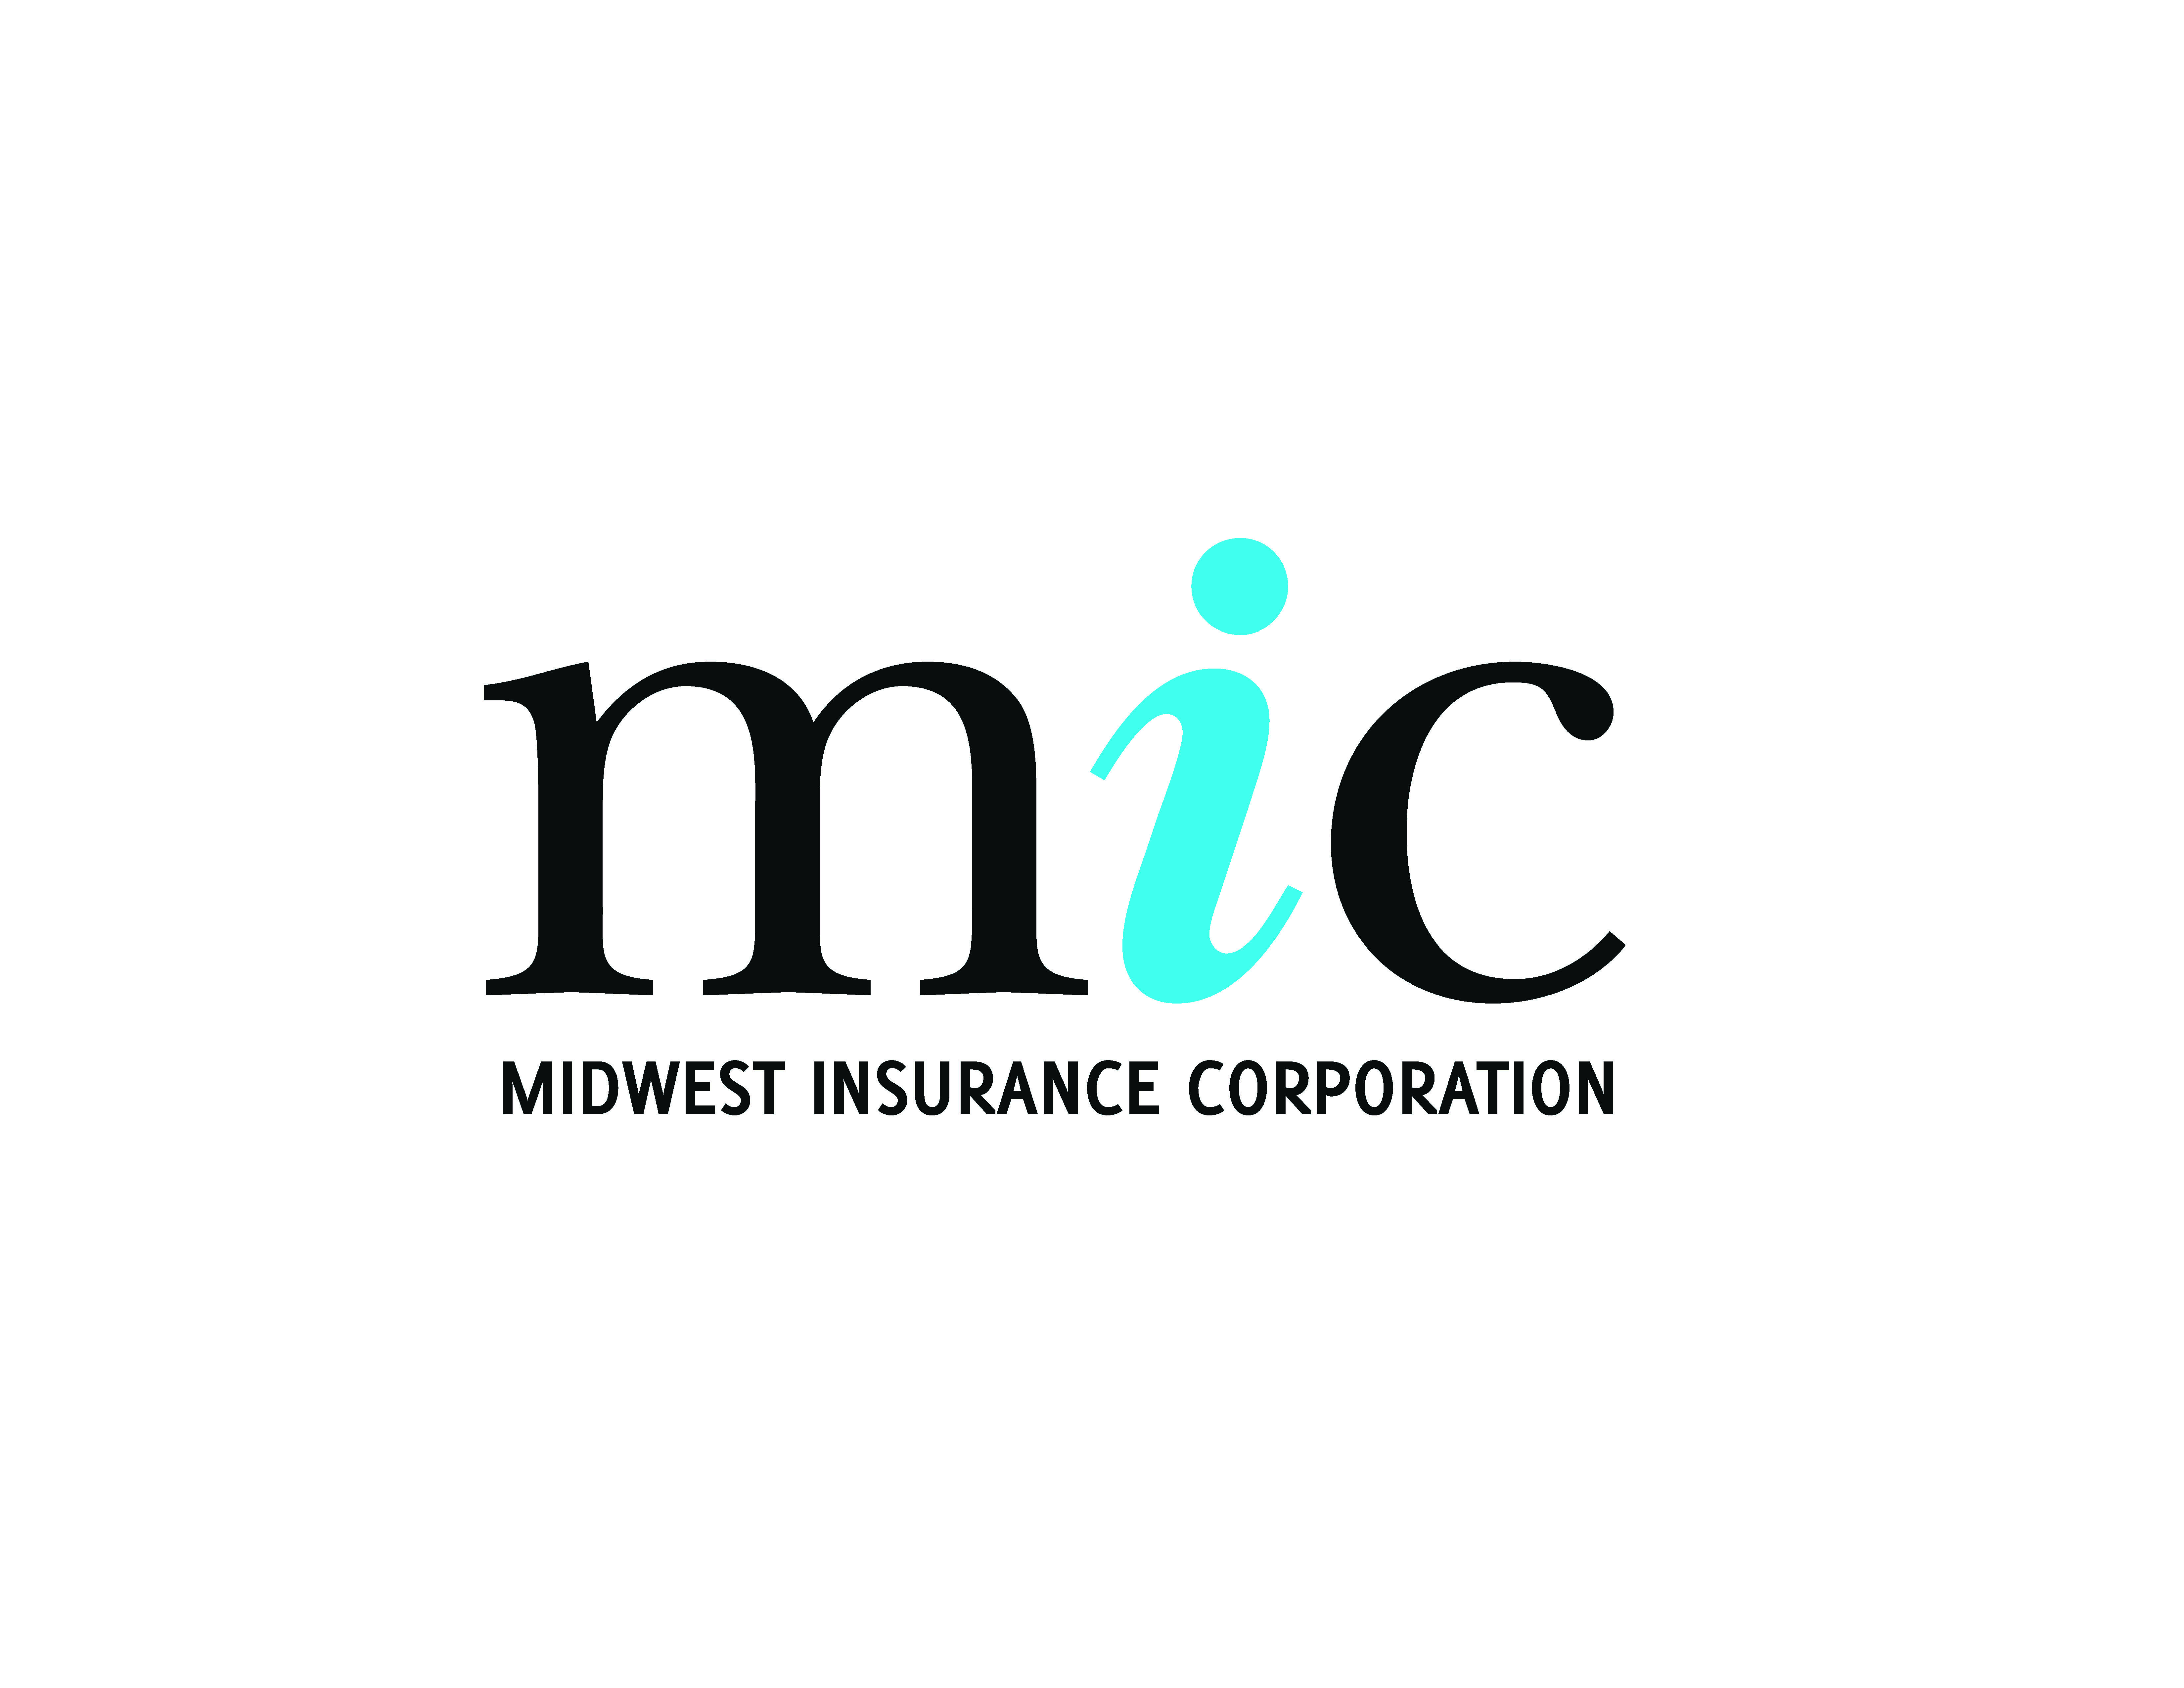 Midwest Insurance Corporation